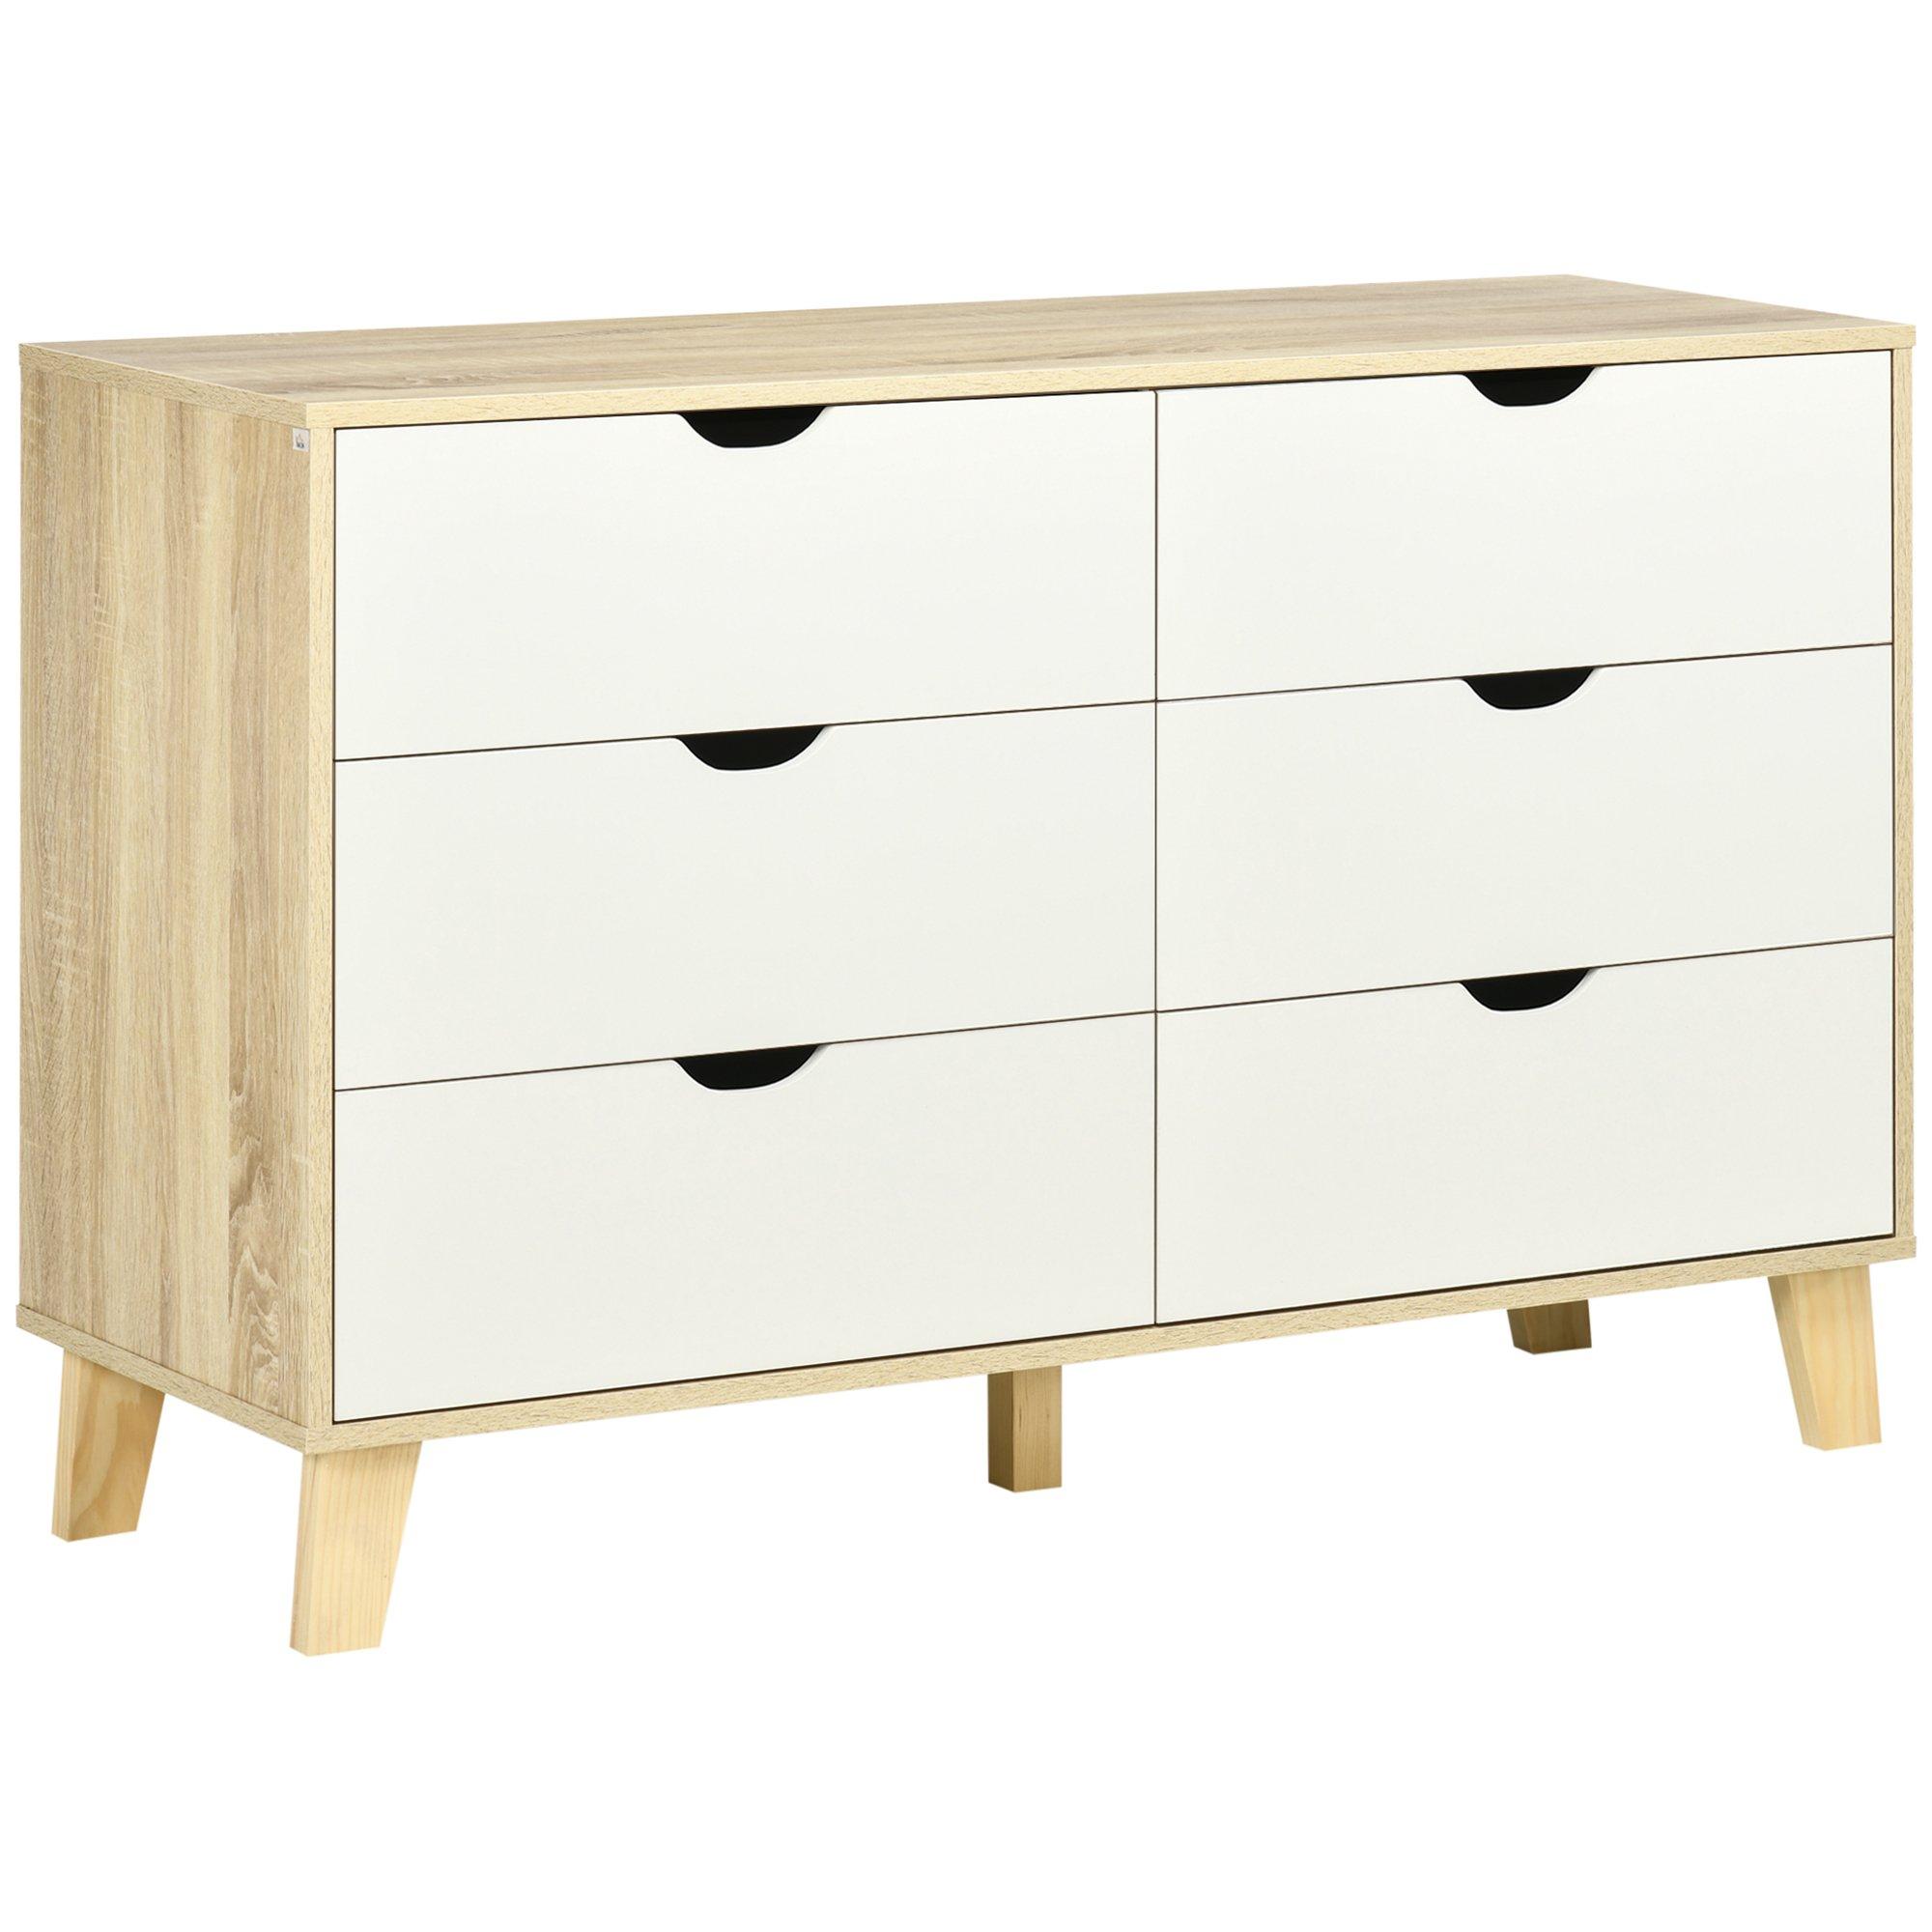 Chest of Drawers 6 Drawer Dresser Storage Cabinet White and Brown